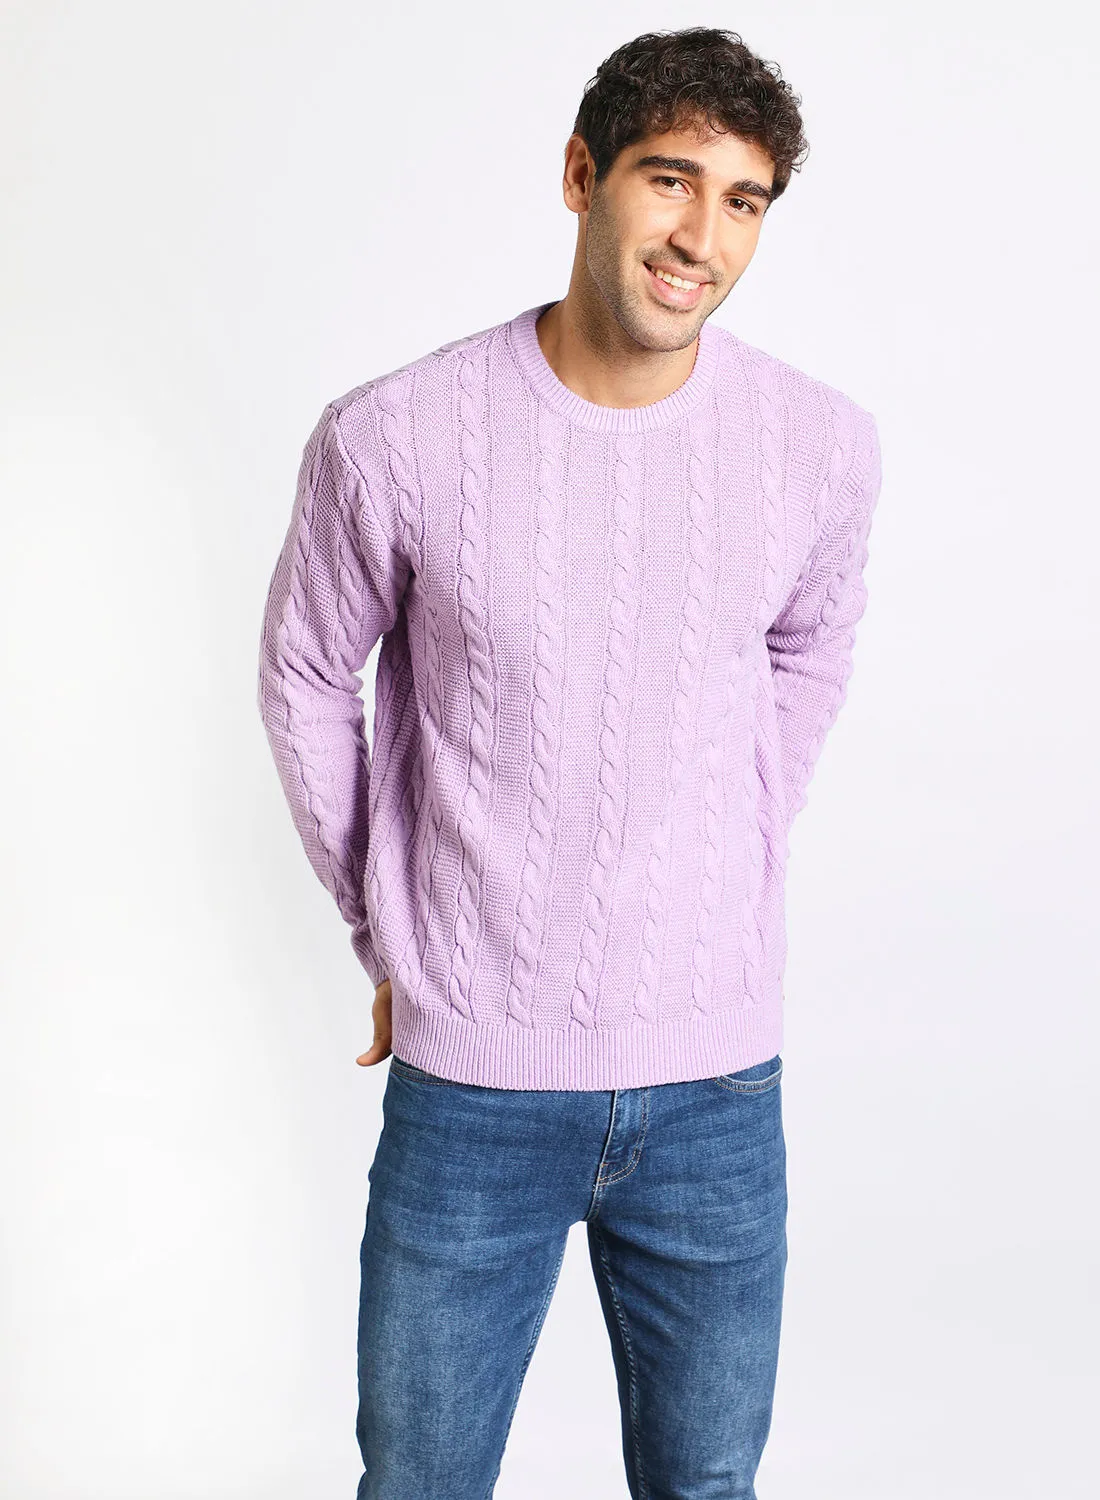 Noon East Men's Ribbed Knitted V-Neck Full Sleeves Warm Sweater For Winters Purple